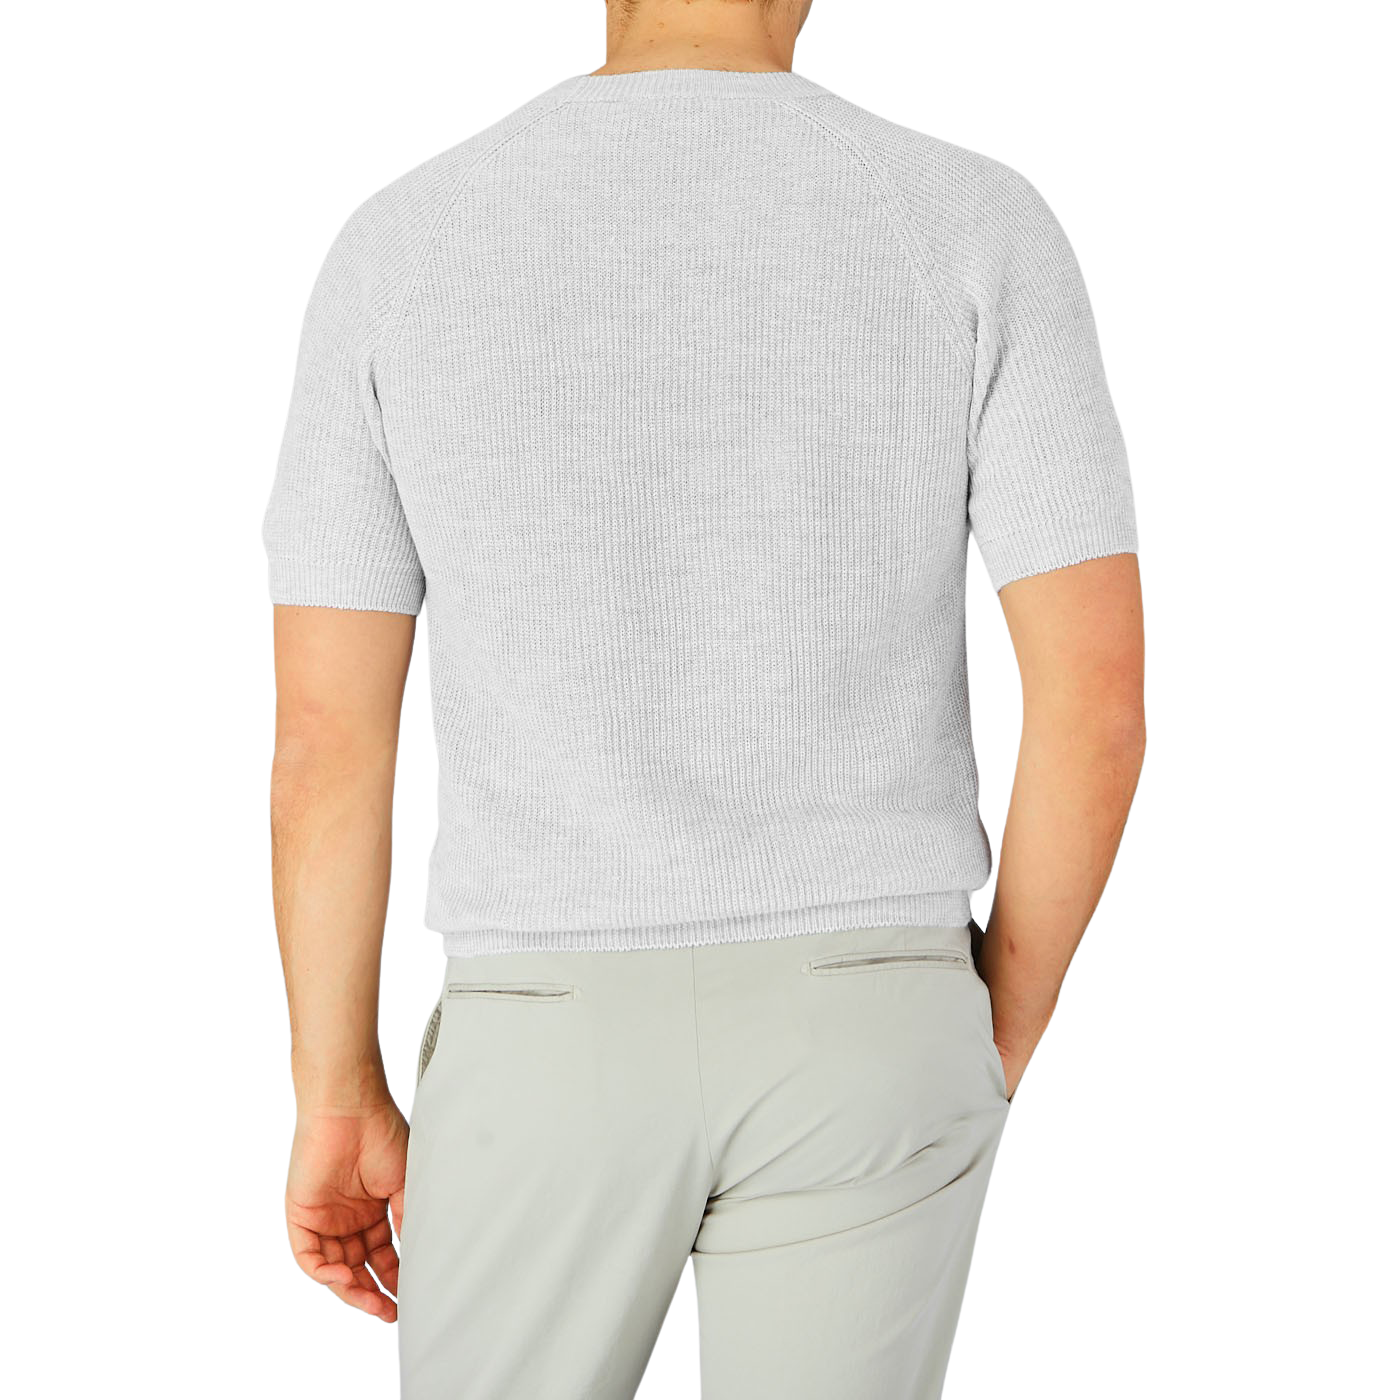 The back view of a man wearing a Gran Sasso Light Grey Linen Cotton T-shirt made with cotton-linen thread.